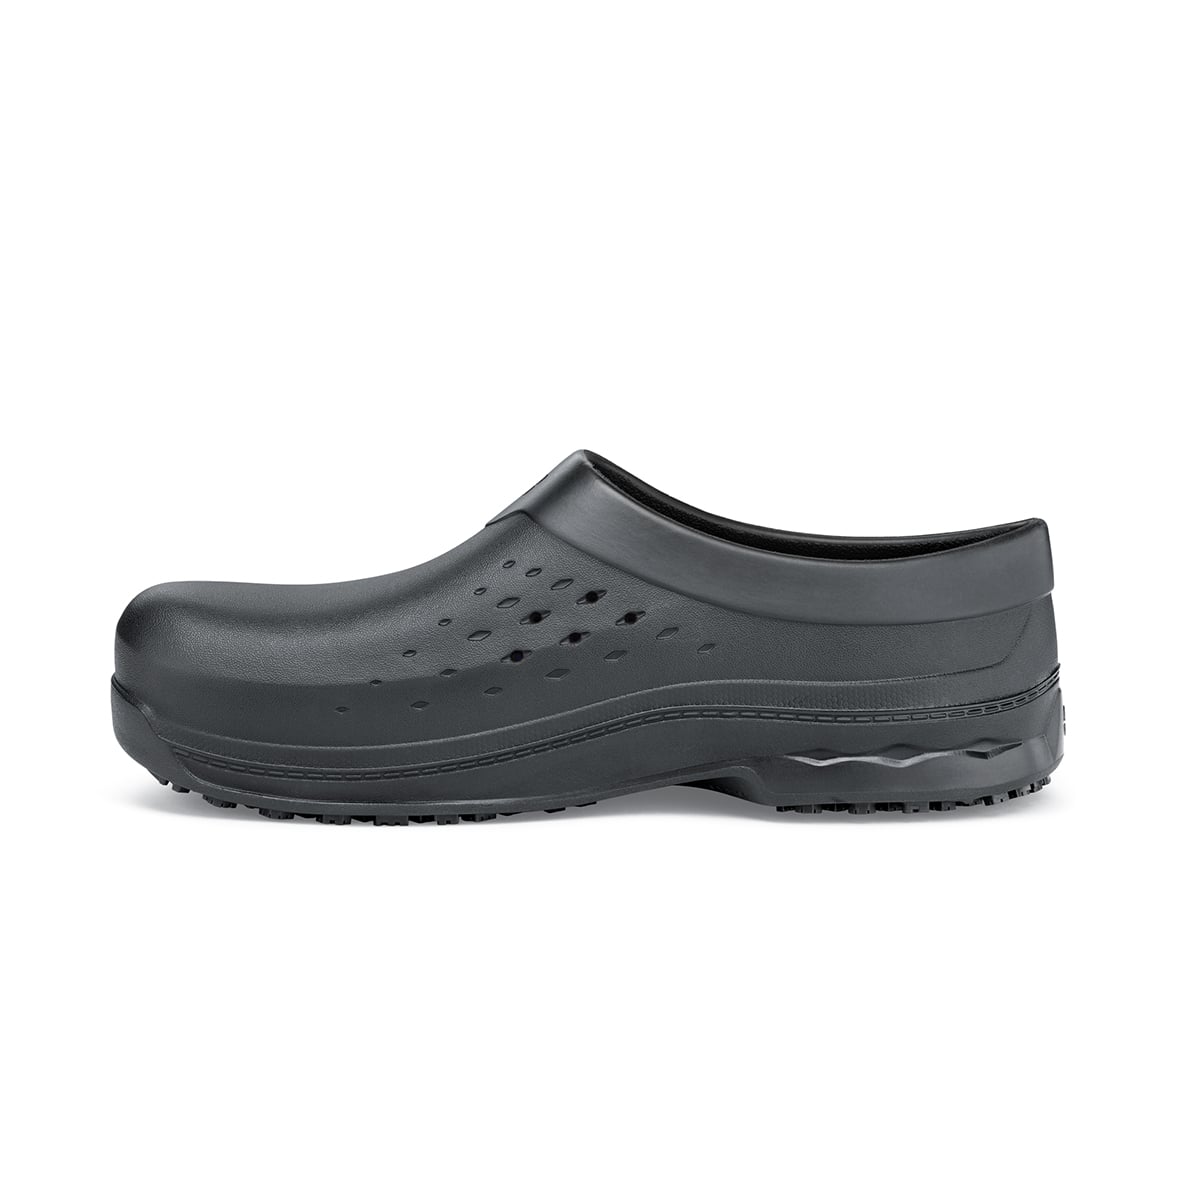 The Radium from Shoes For Crews are slip-on, slip-resistant shoes designed to provide comfort throughout the day, seen from the left.